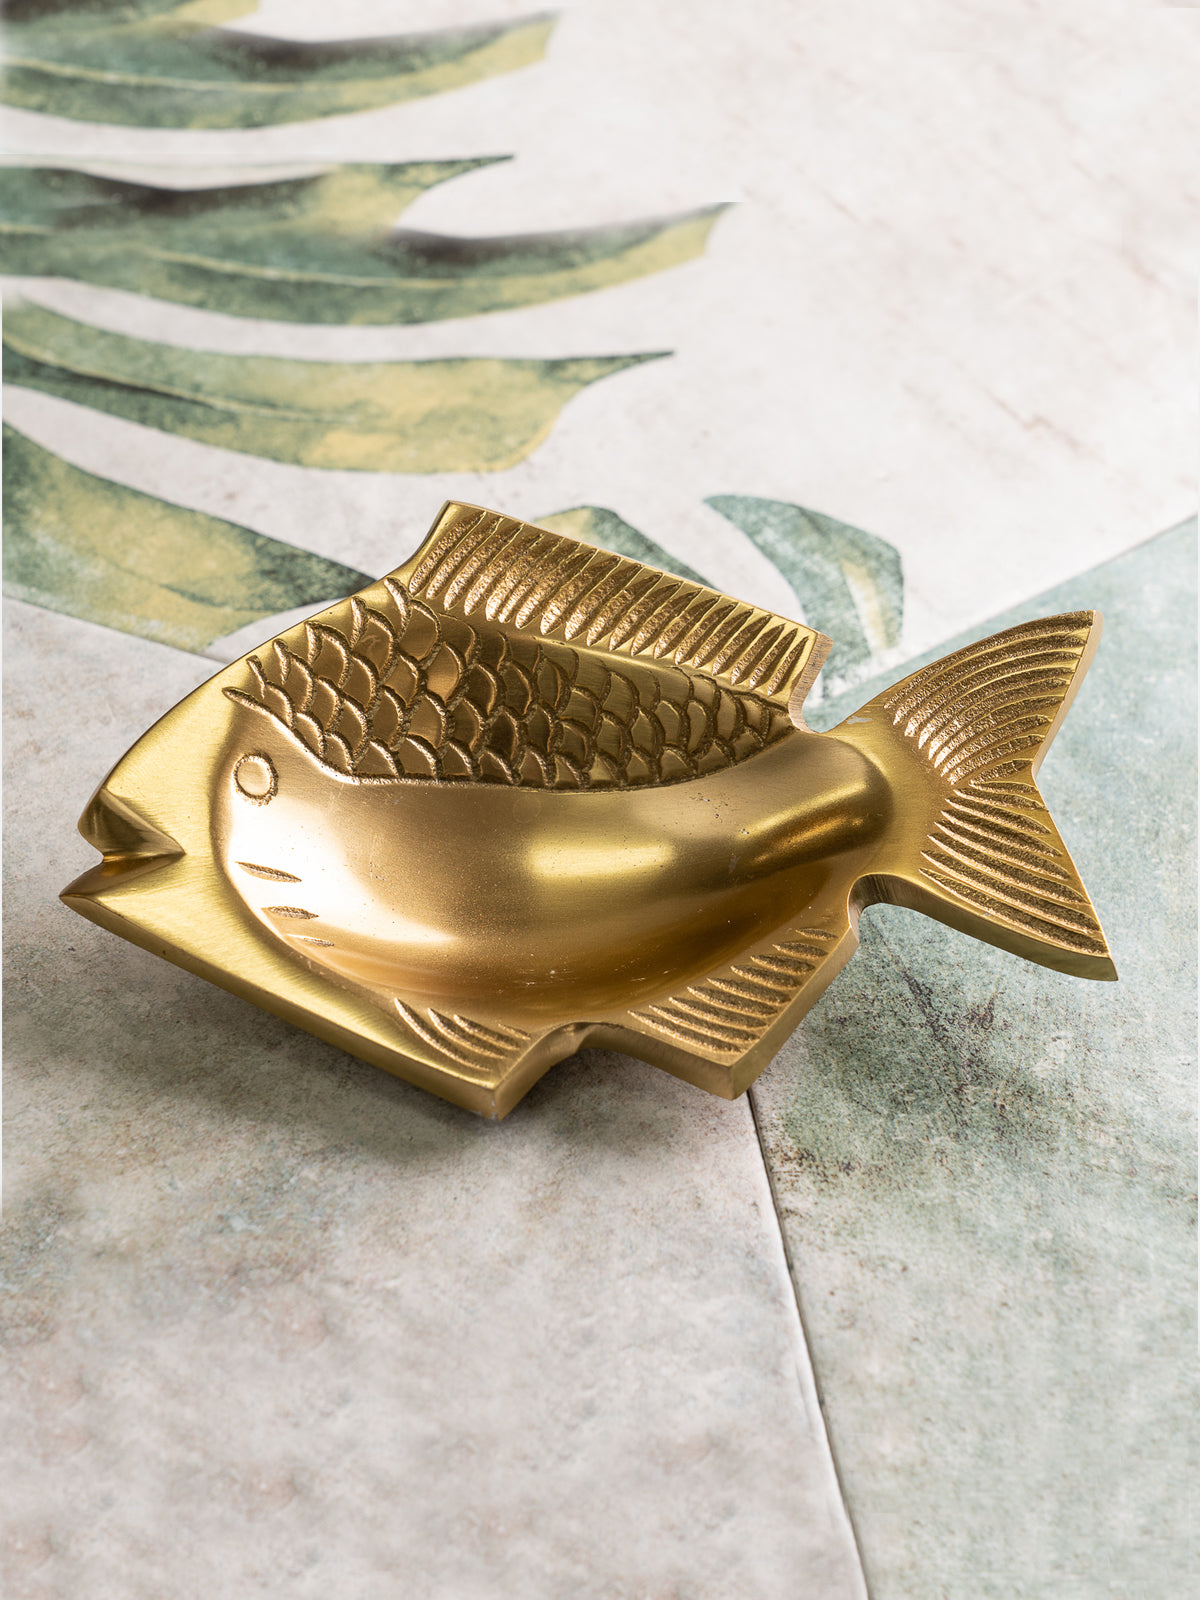 Etched Gold Fish Tray